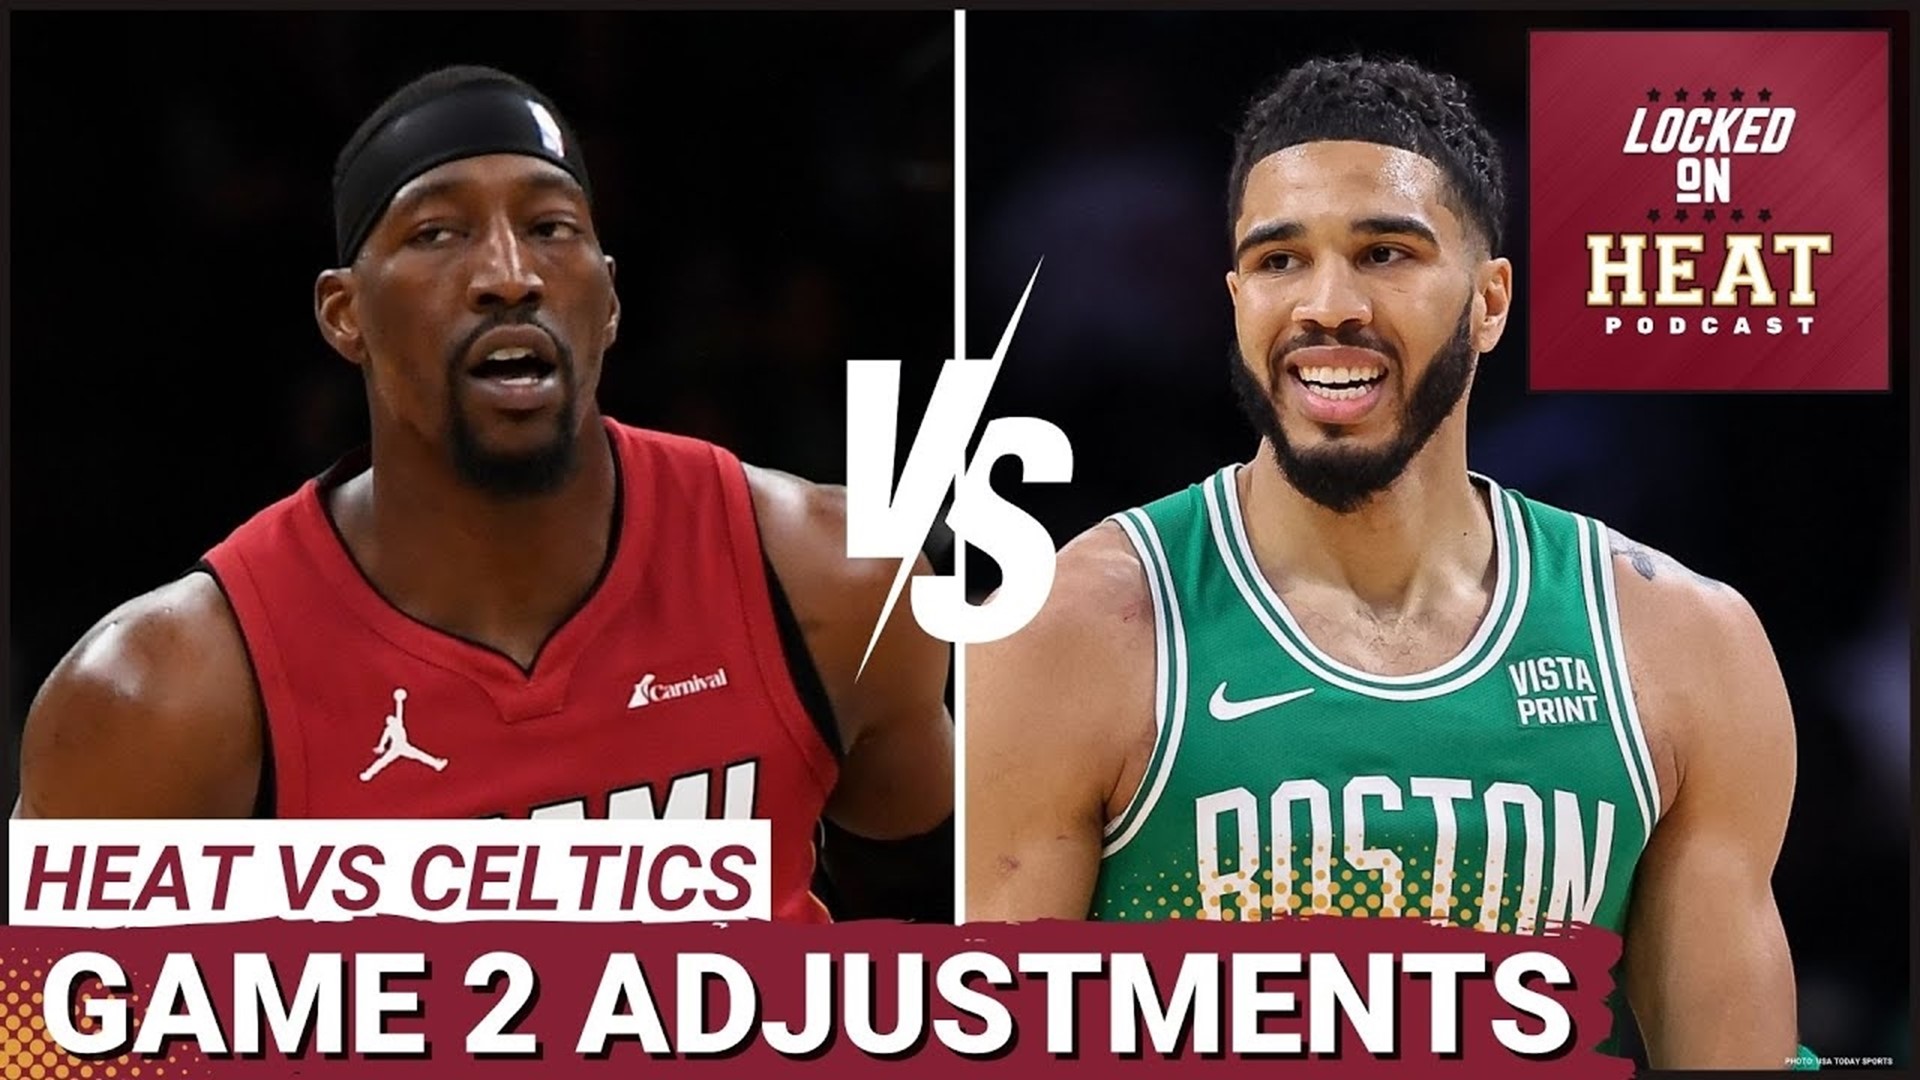 The Miami Heat aim to bounce back against the Boston Celtics in Game 2 tonight. What adjustments do they have to make to split the series?